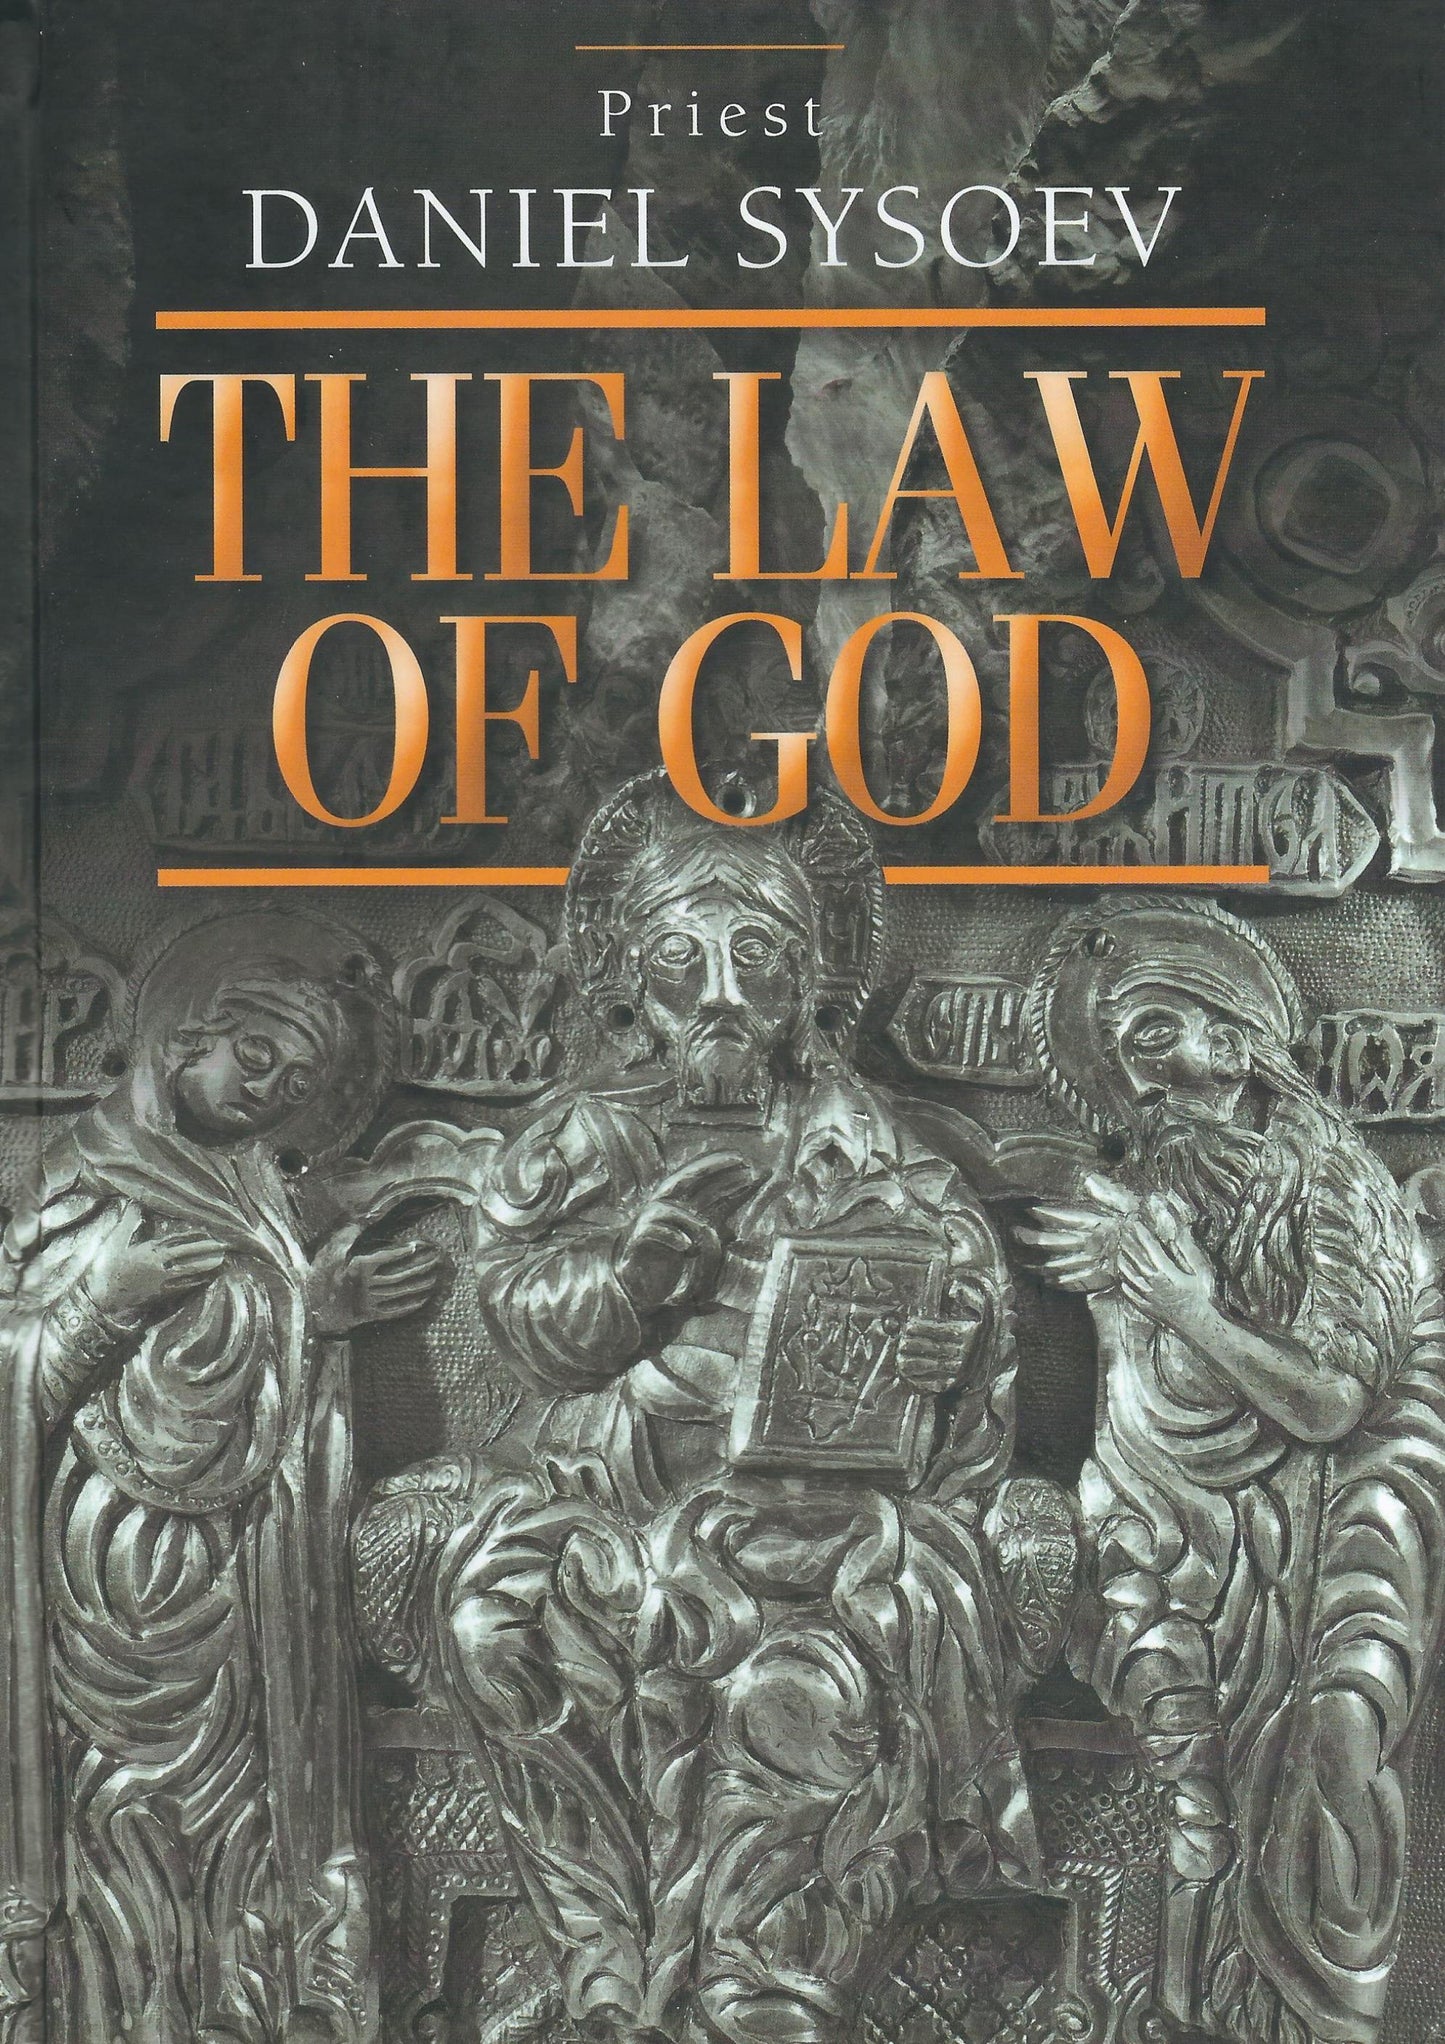 The Law of God: An Introduction to Orthodox Christianity